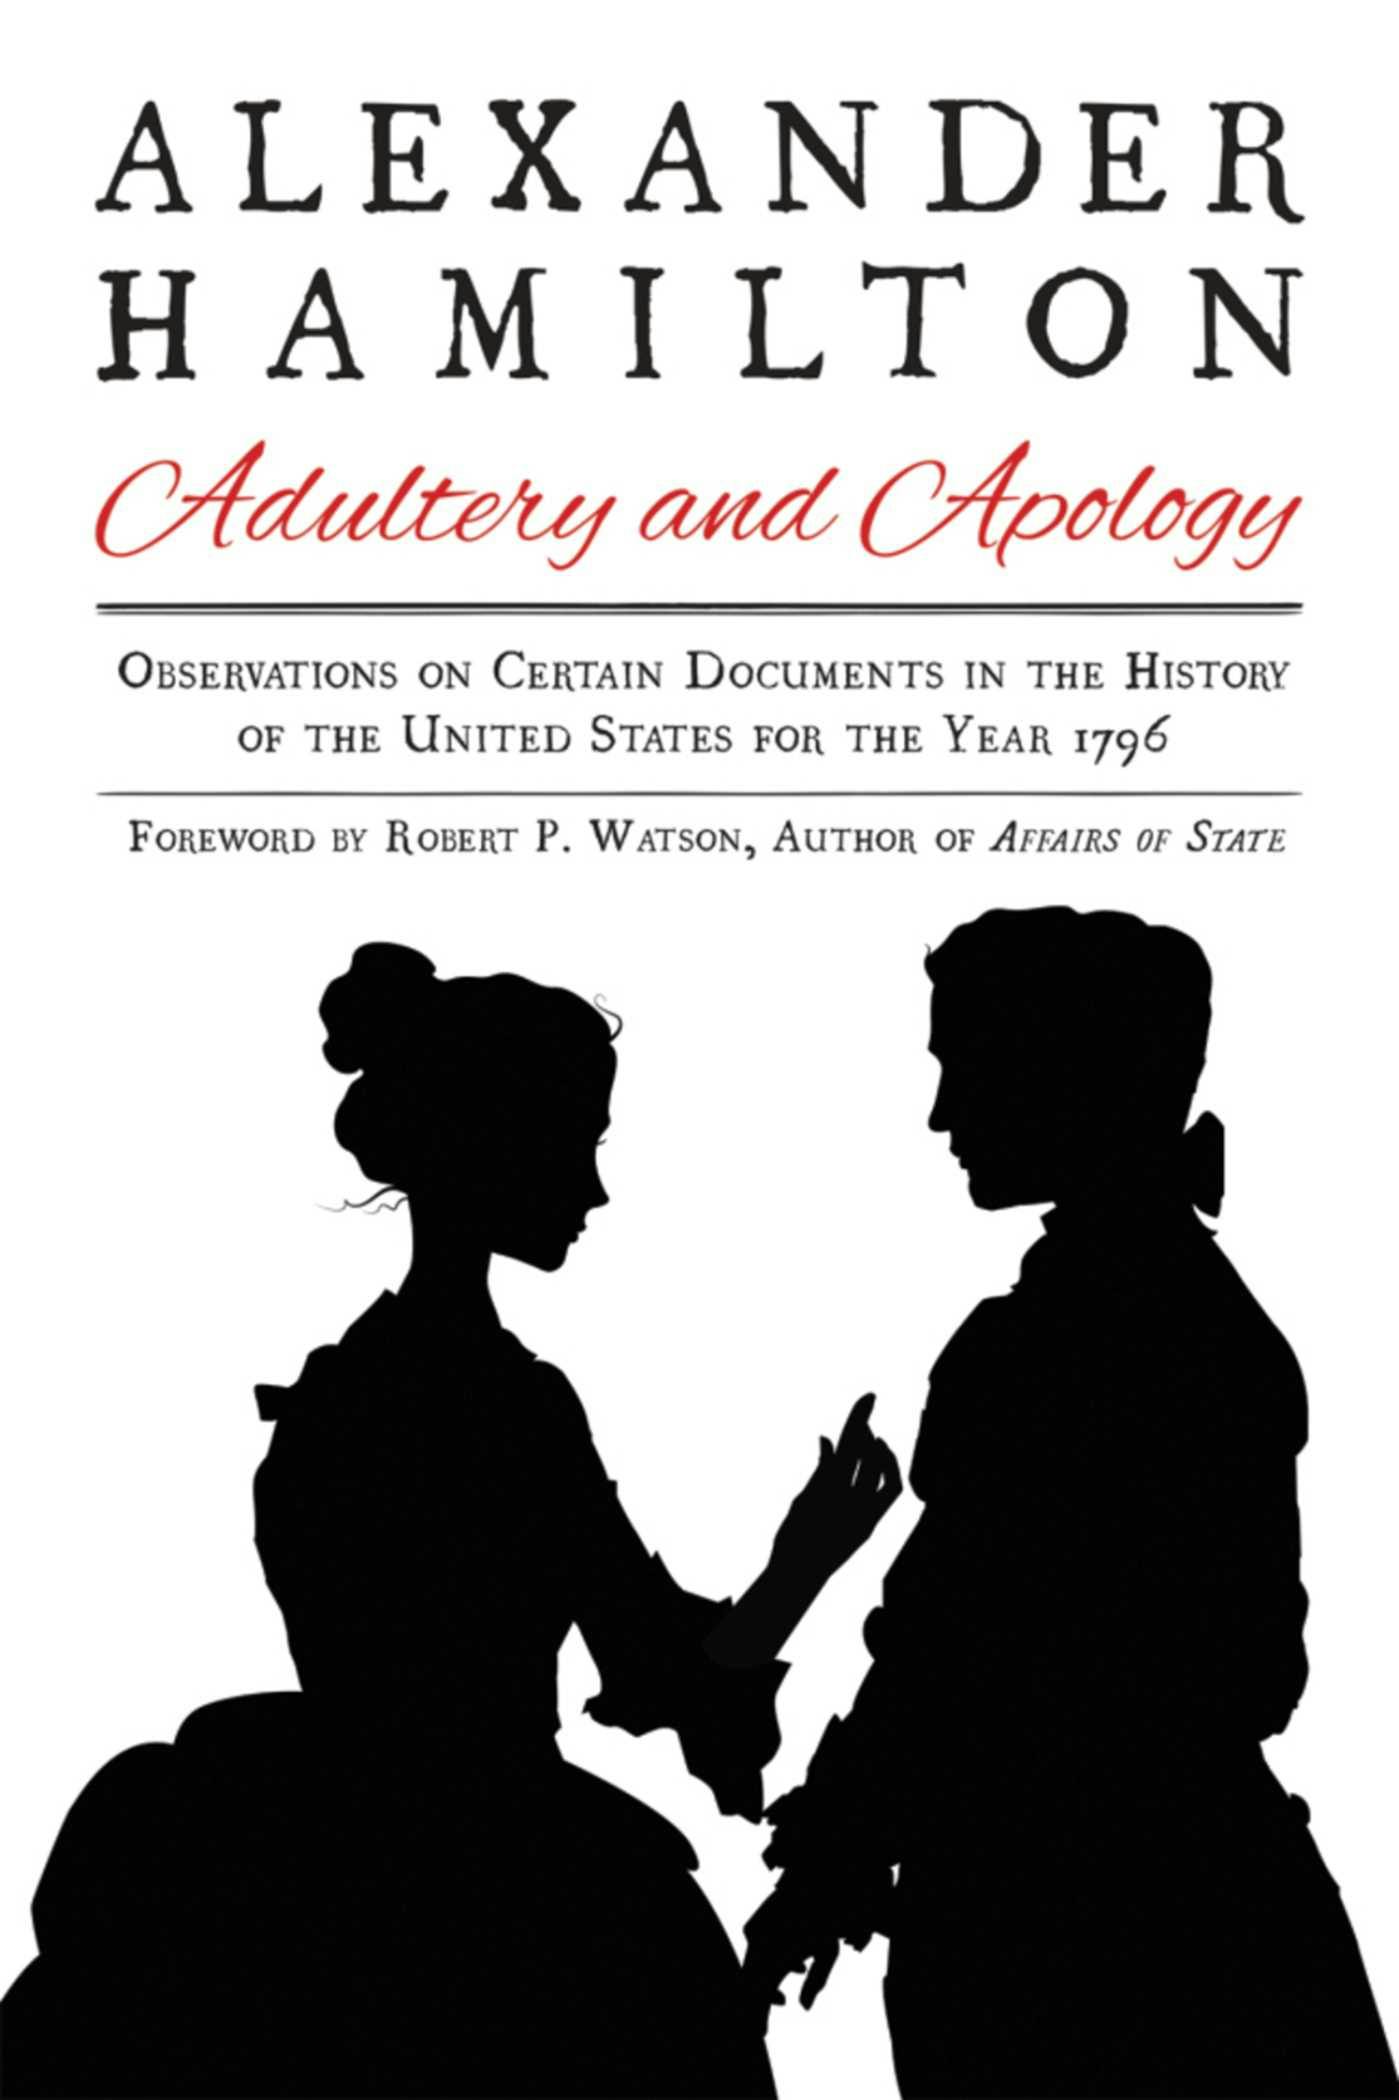 Alexander Hamilton: Adultery and Apology: Observations on Certain Documents in the History of the United States for the Year 1796 - Alexander Hamilton